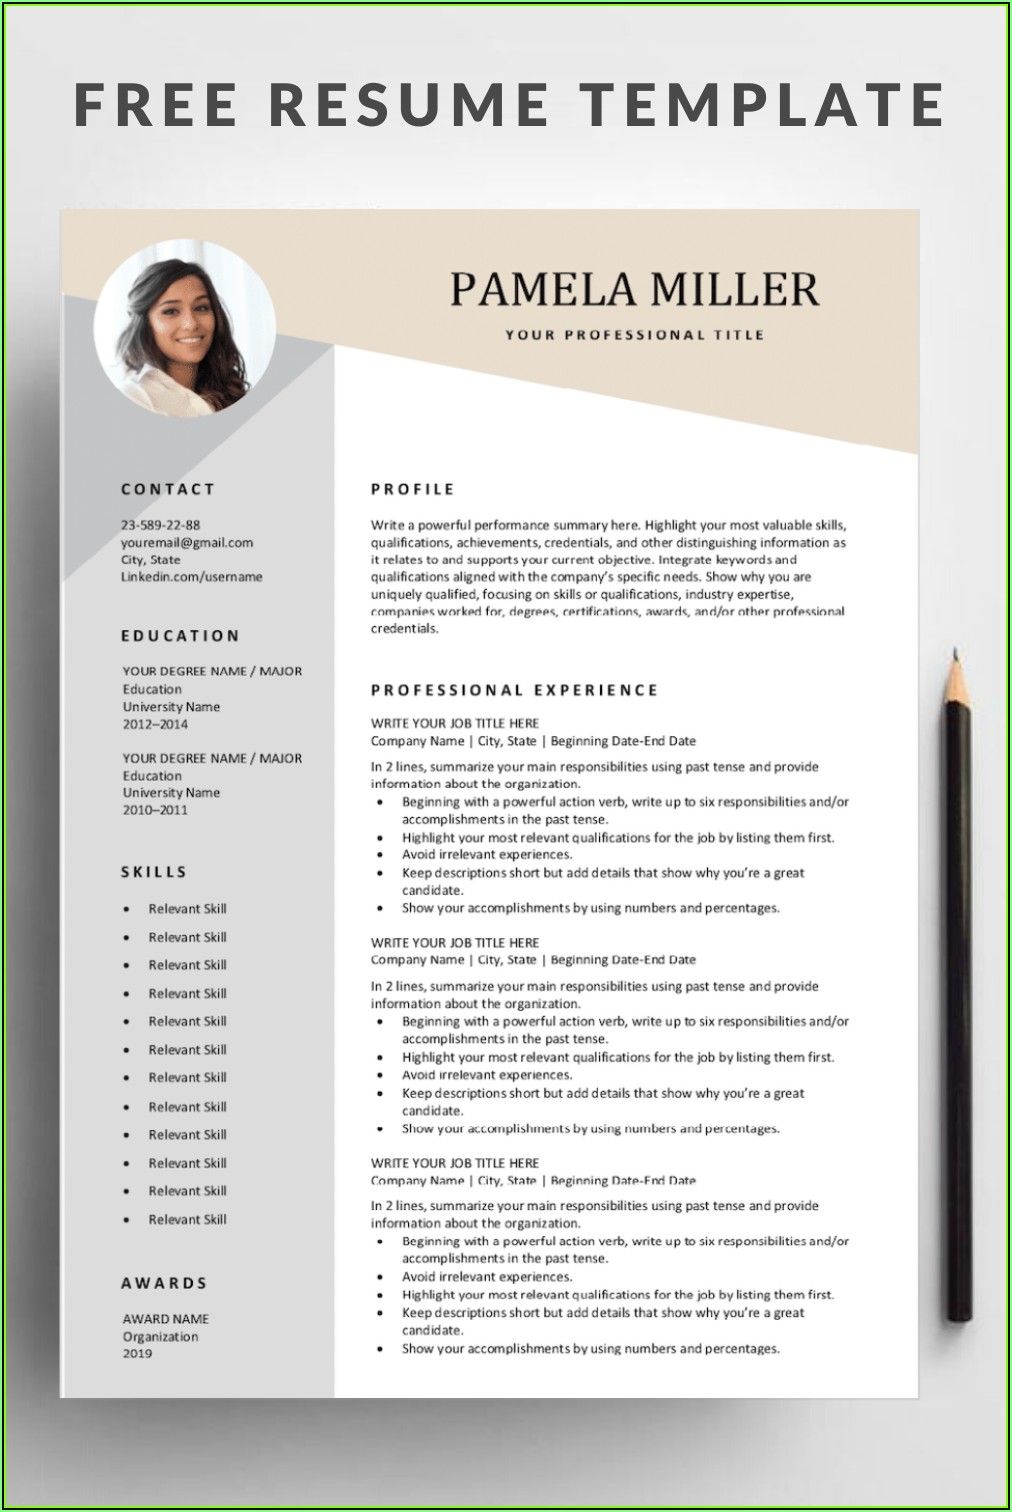 Totally Free Downloadable Resume Templates Resume : Resume Examples #